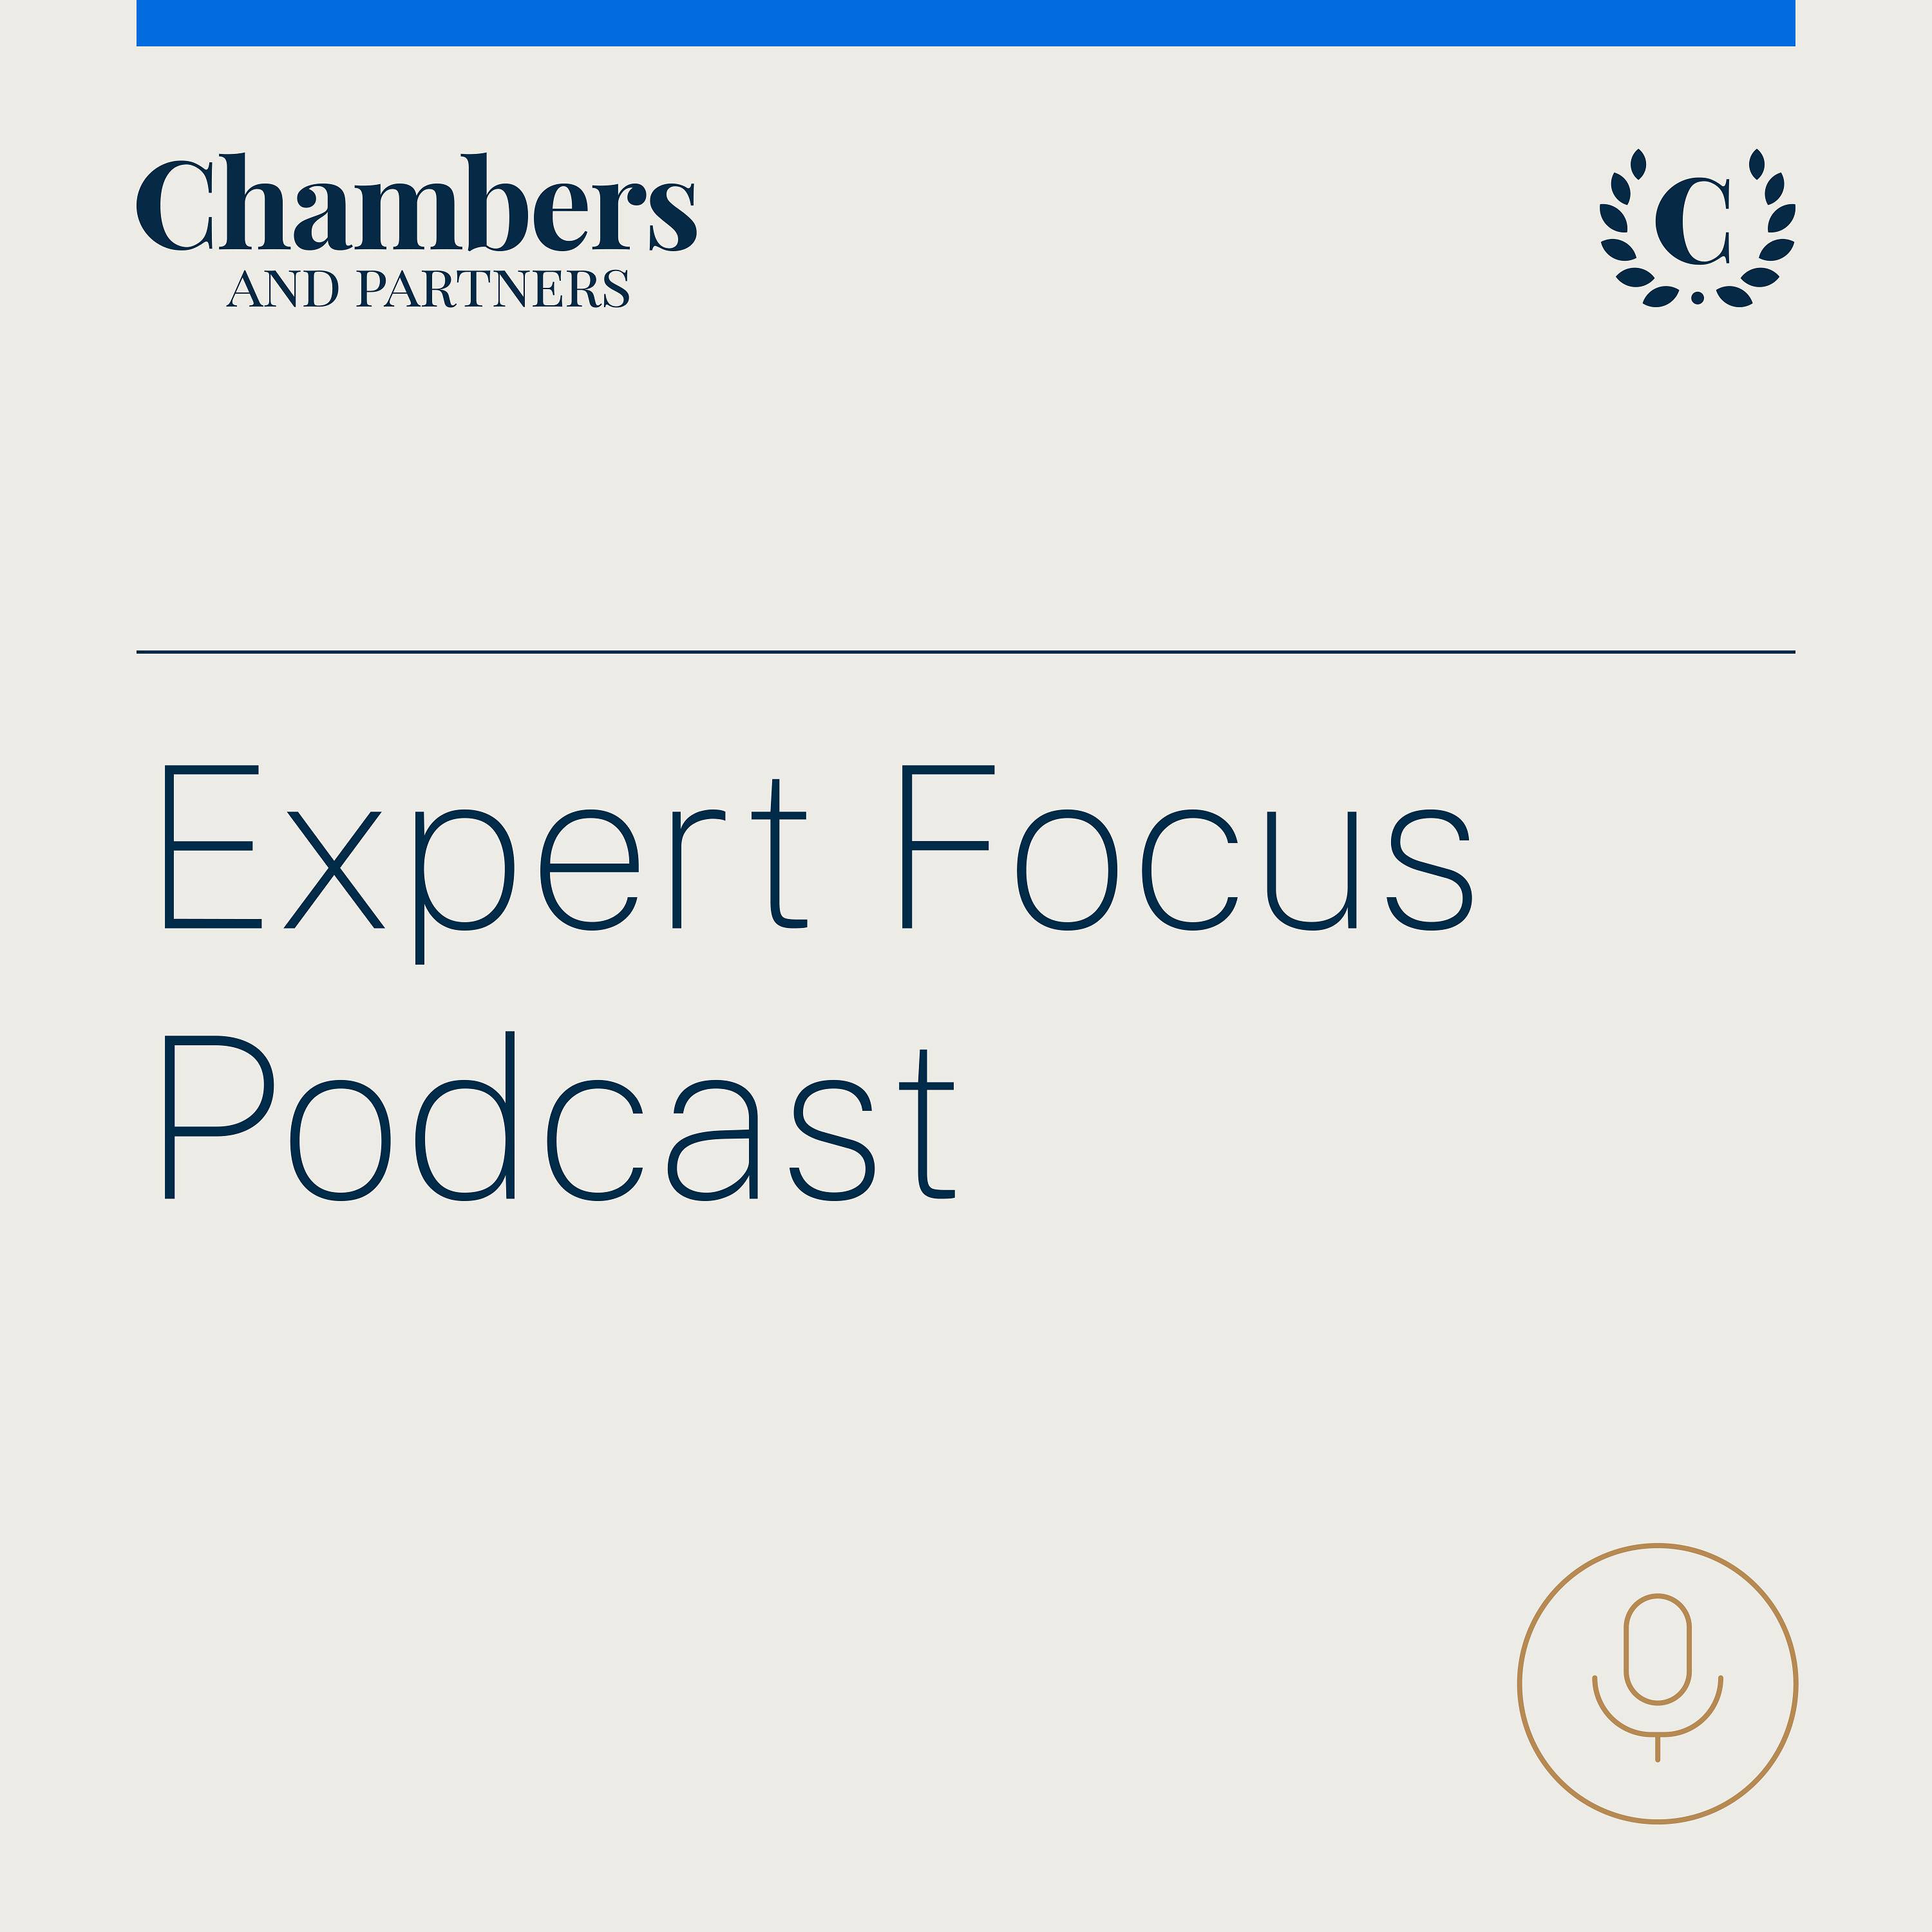 Chambers Expert Focus Podcasts